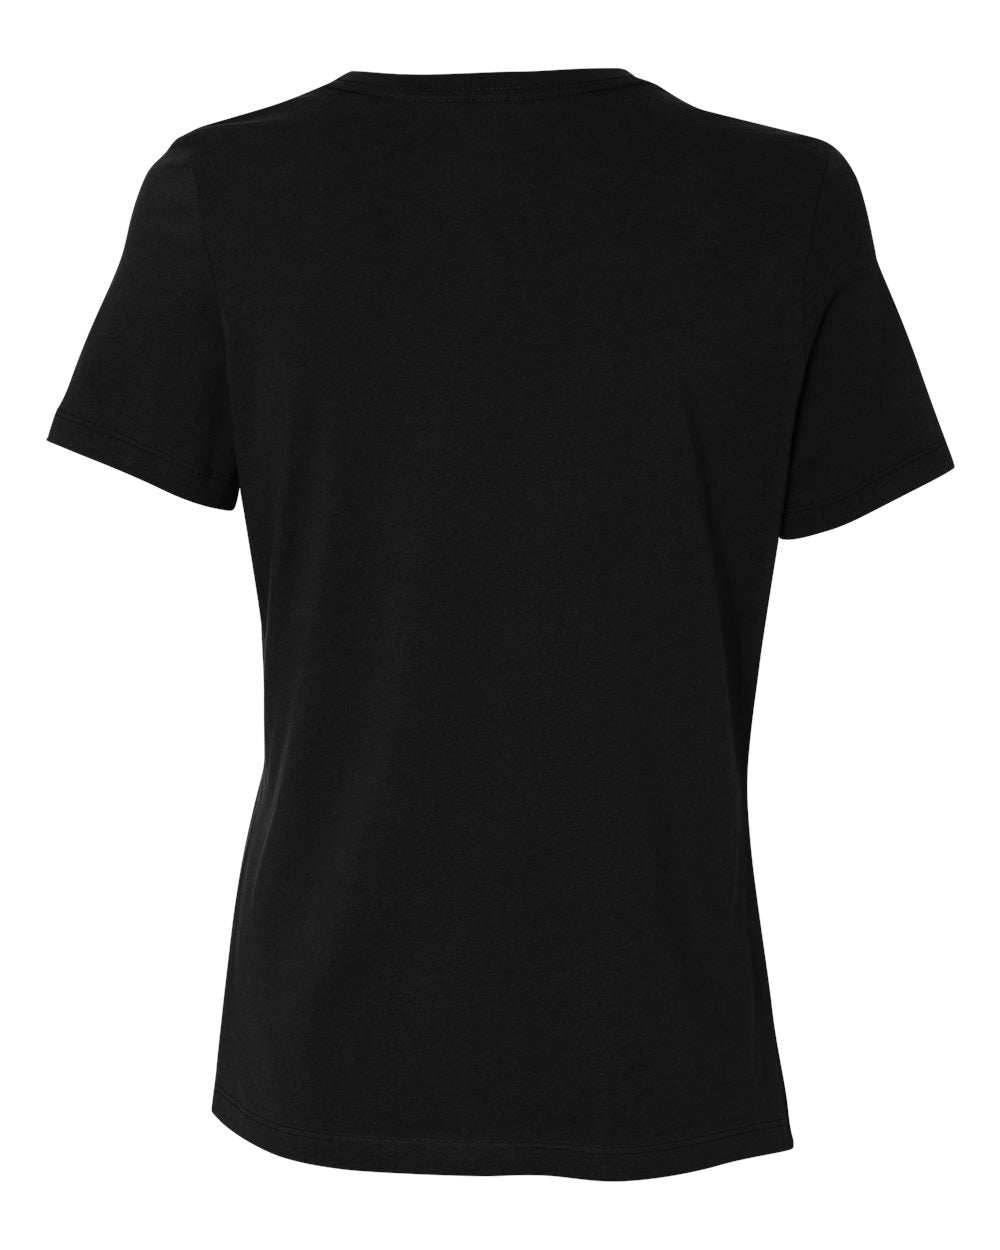 BELLA + CANVAS Women’s Relaxed Jersey Tee 6400 #color_Black